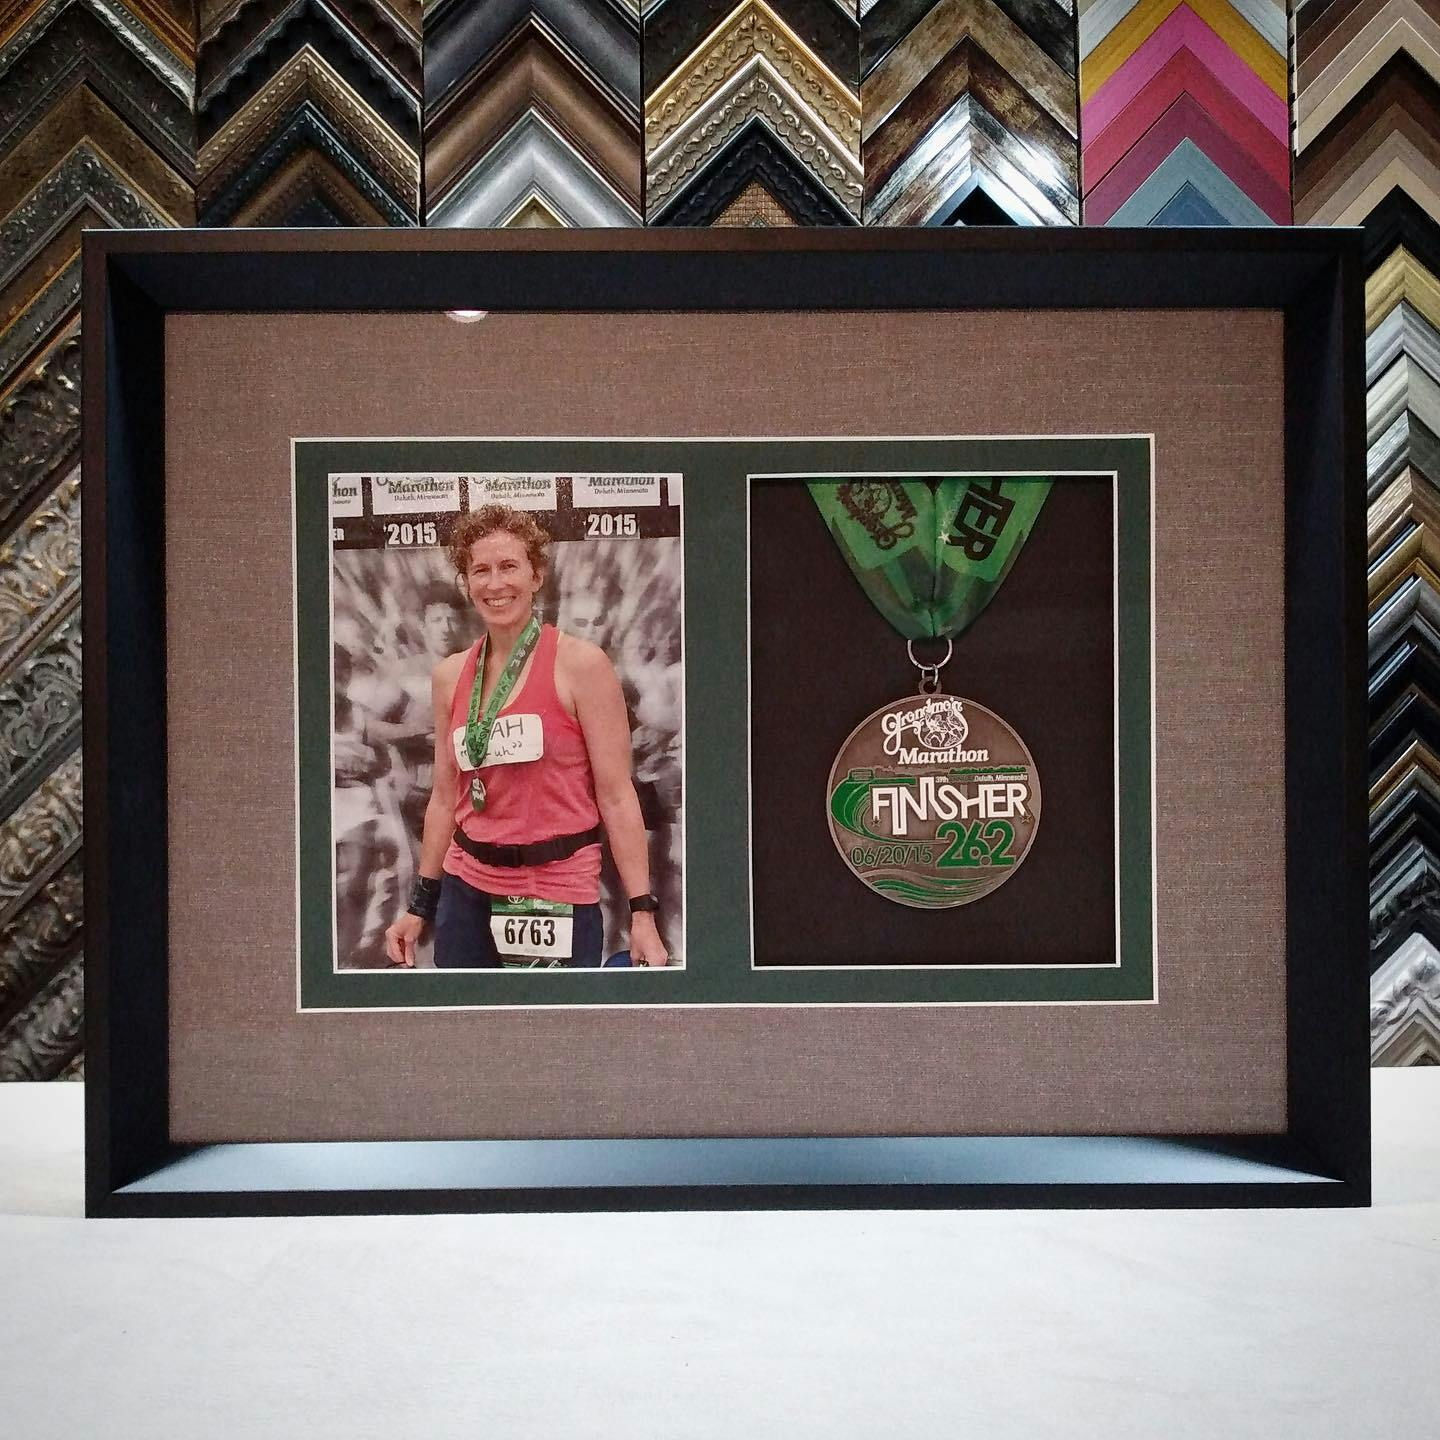 From sports memorabilia to family heirlooms, we can help you display your memories!